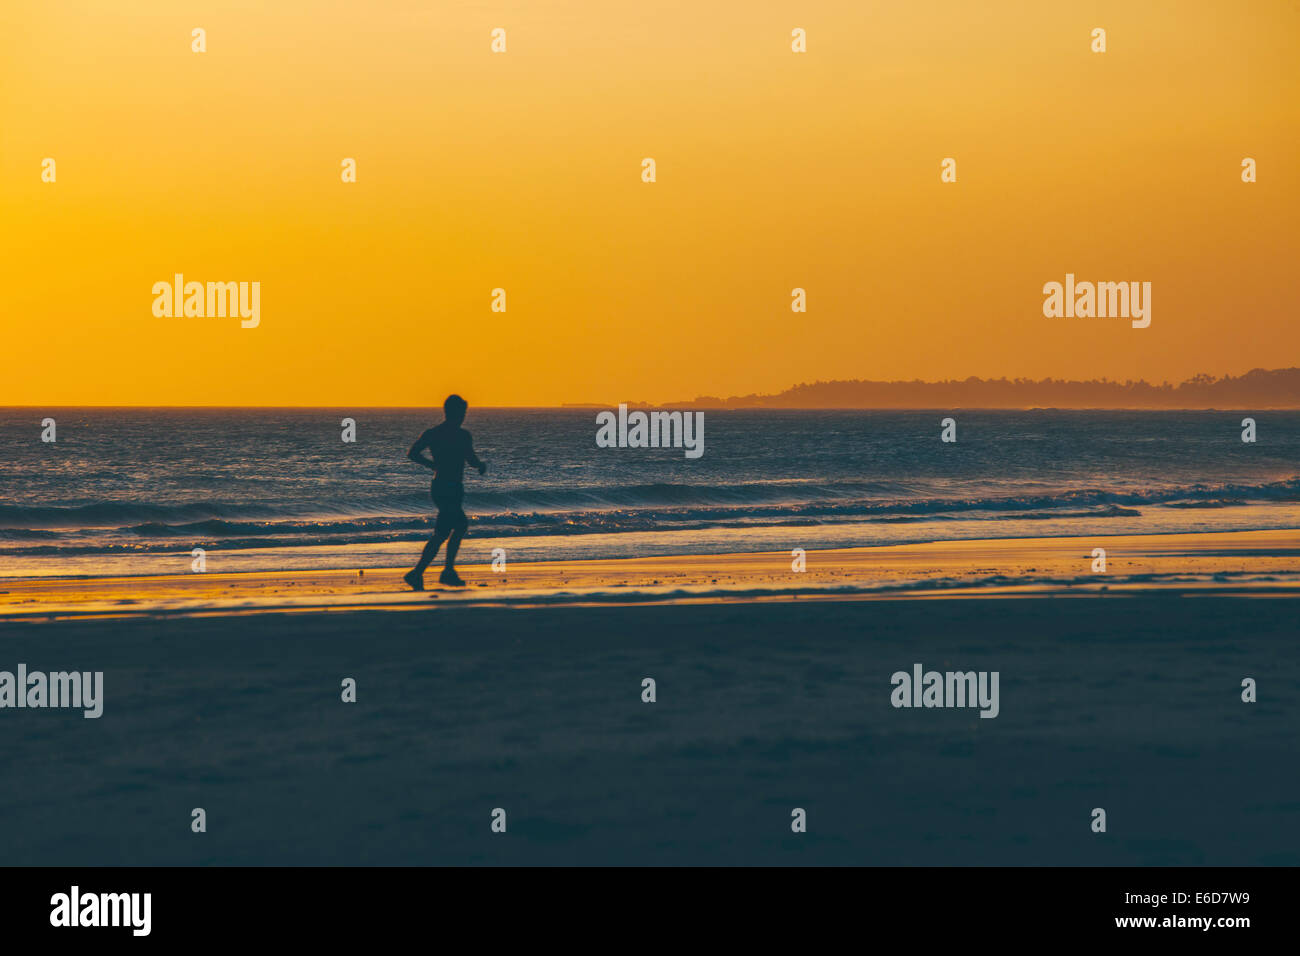 Indonesia, Bali, man jogging on the beach at sunset Stock Photo